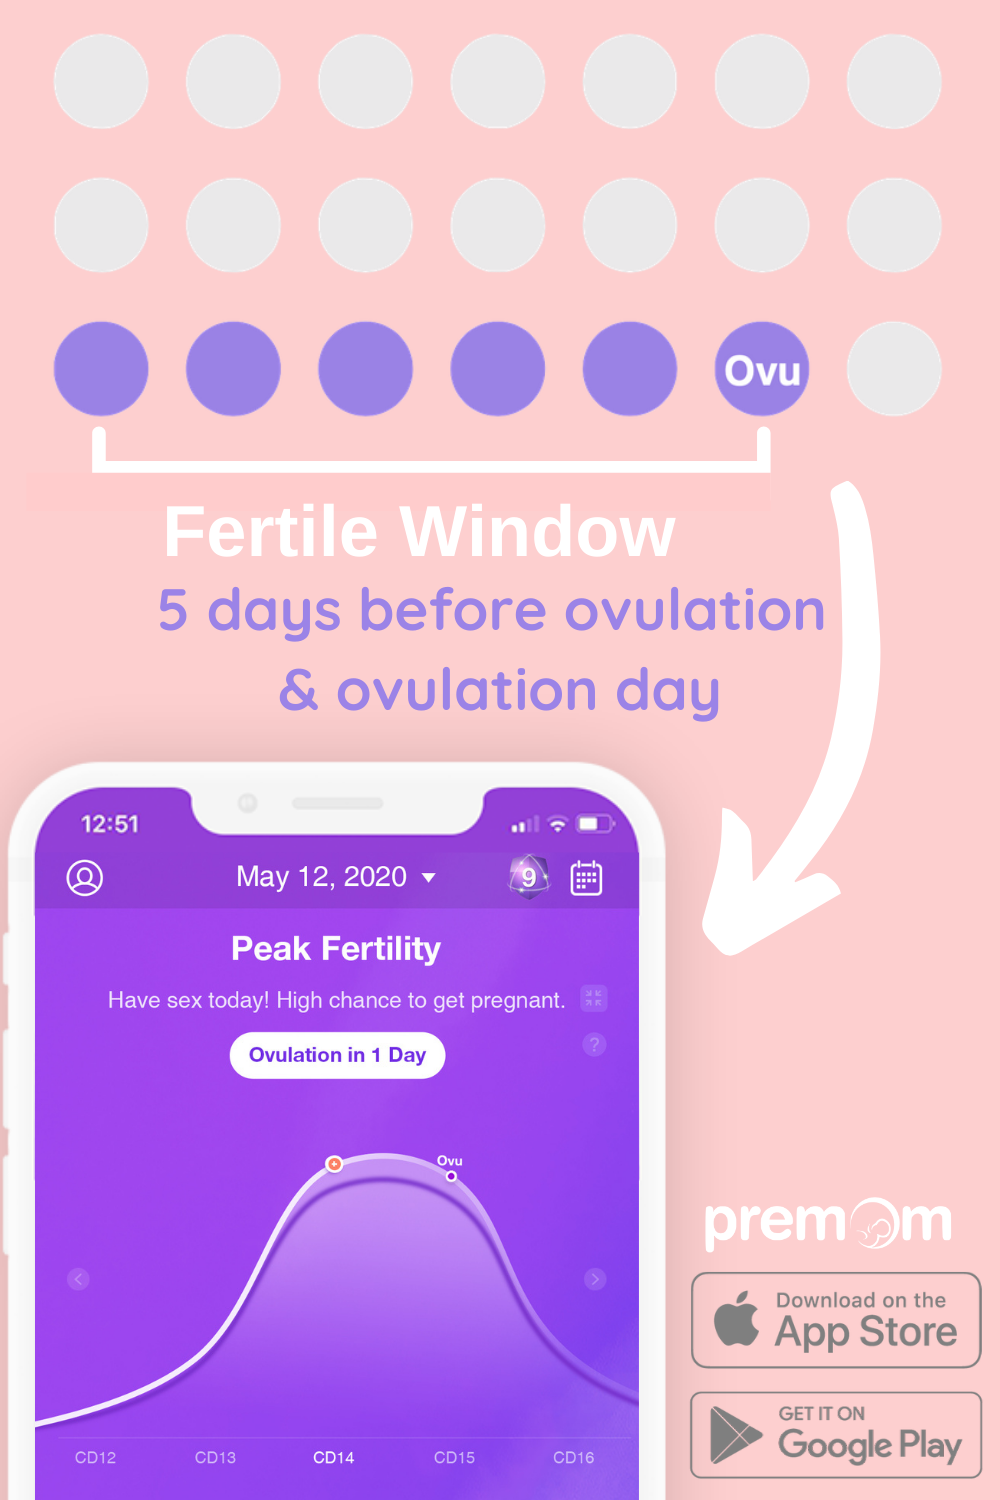 Pin on Getting Pregnant with Premom